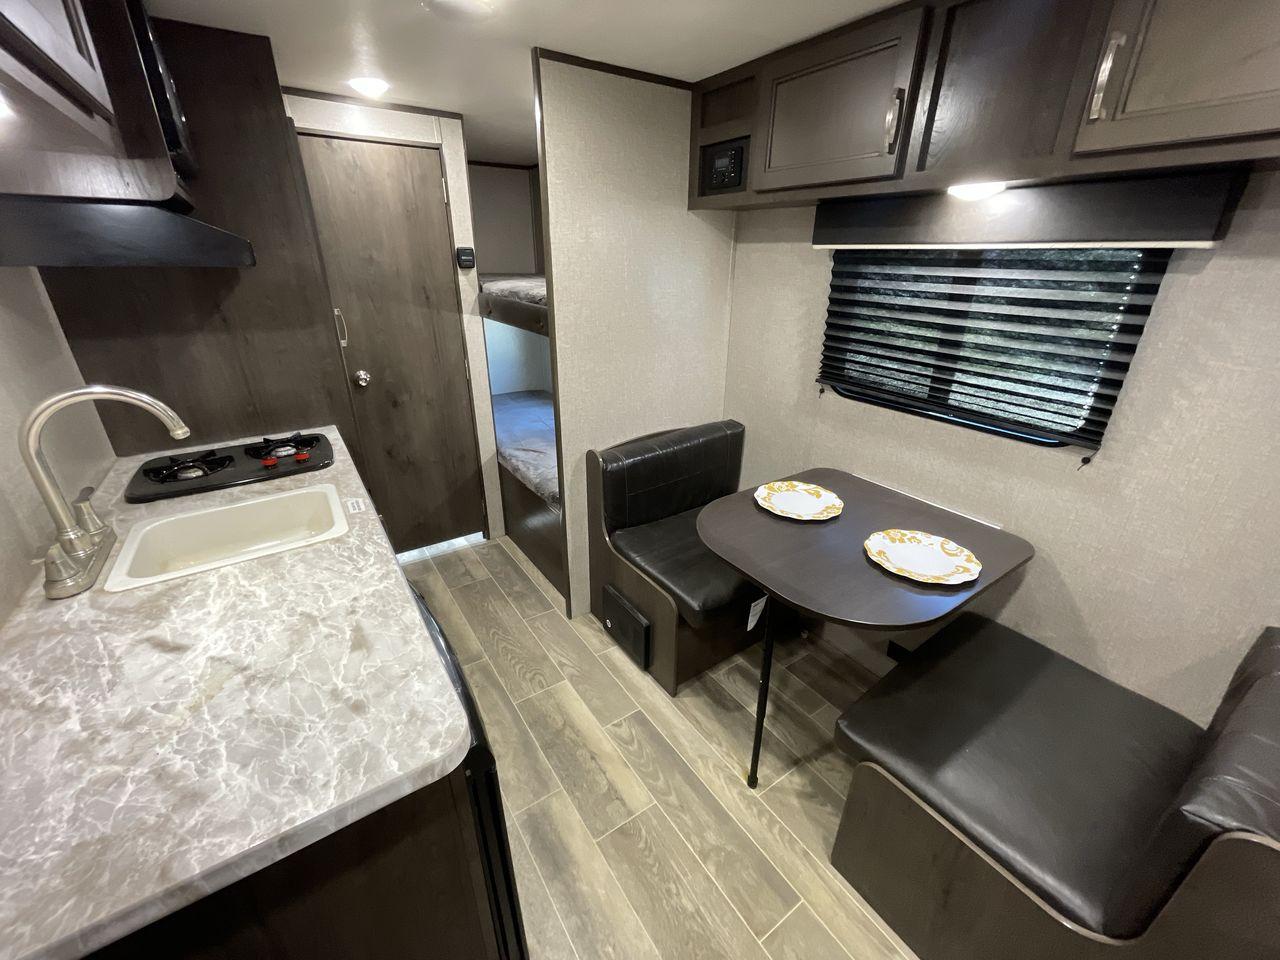 2021 JAYCO JAY FLIGHT SLX 174BH (1UJBJ0AJ1M1) , Length: 21.67 ft | Dry Weight: 3,075 lbs | GVWR: 3,950 lbs | Slides: 0 transmission, located at 4319 N Main Street, Cleburne, TX, 76033, (817) 221-0660, 32.435829, -97.384178 - Take the 2021 Jayco Jay Flight SLX 174BH travel trailer out on your camping adventures. This lightweight and small RV is ideal for people looking for an affordable and cozy way to enjoy the great outdoors. The dimensions of this unit are 21.67 ft in length, 7.08 ft in width, and 9.17 ft in height. I - Photo #11